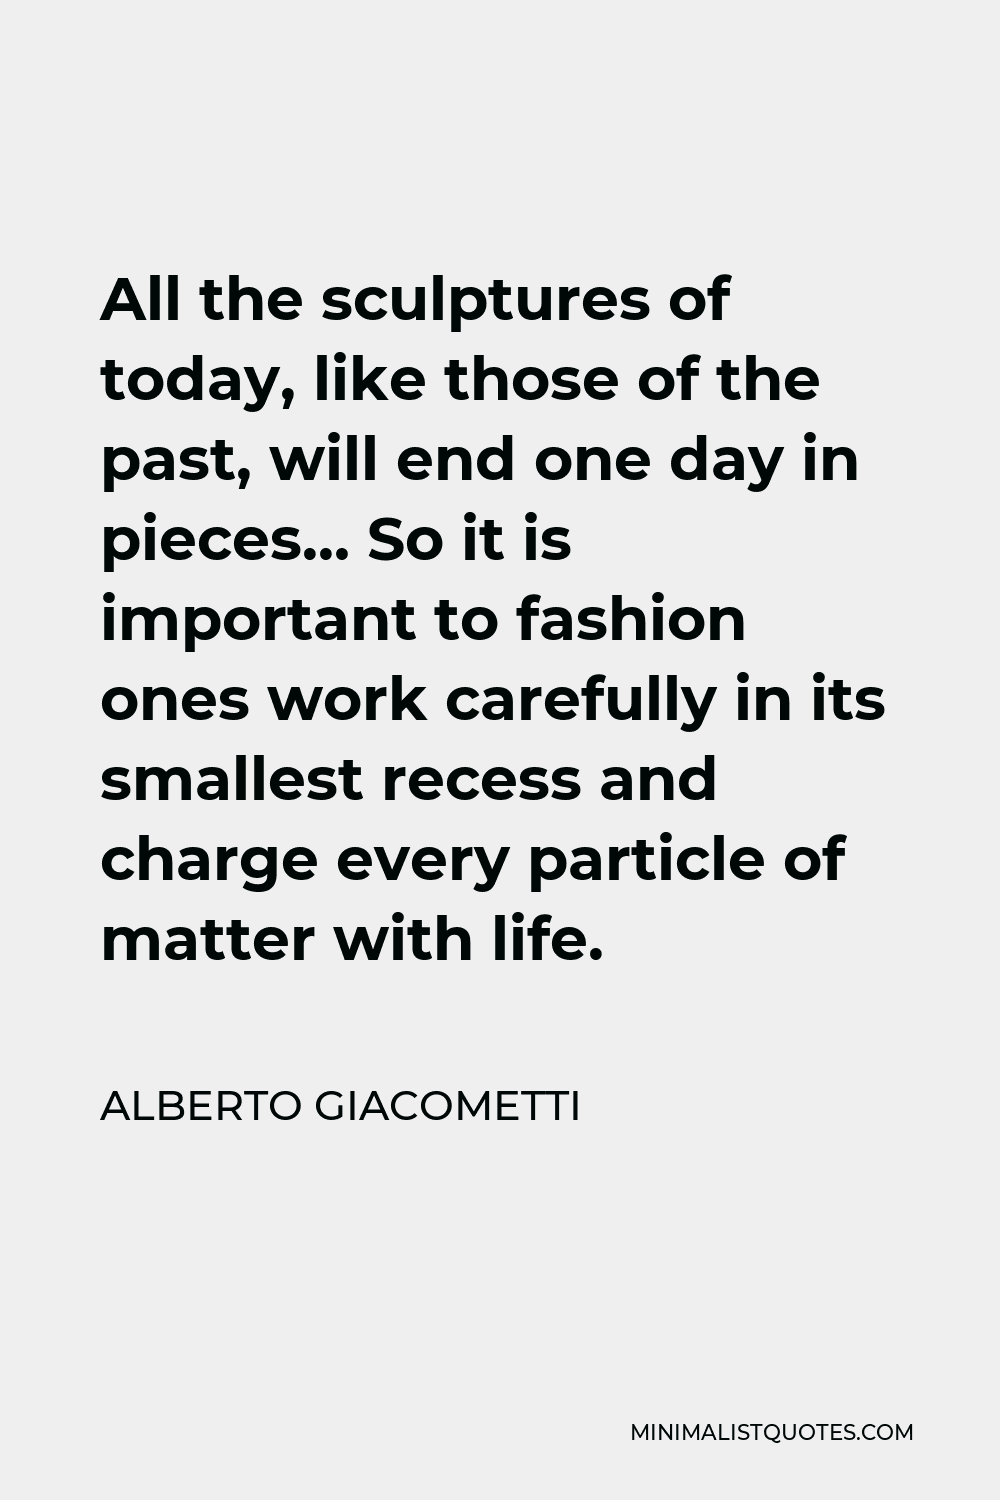 Alberto Giacometti Quote - All the sculptures of today, like those of the past, will end one day in pieces… So it is important to fashion ones work carefully in its smallest recess and charge every particle of matter with life.